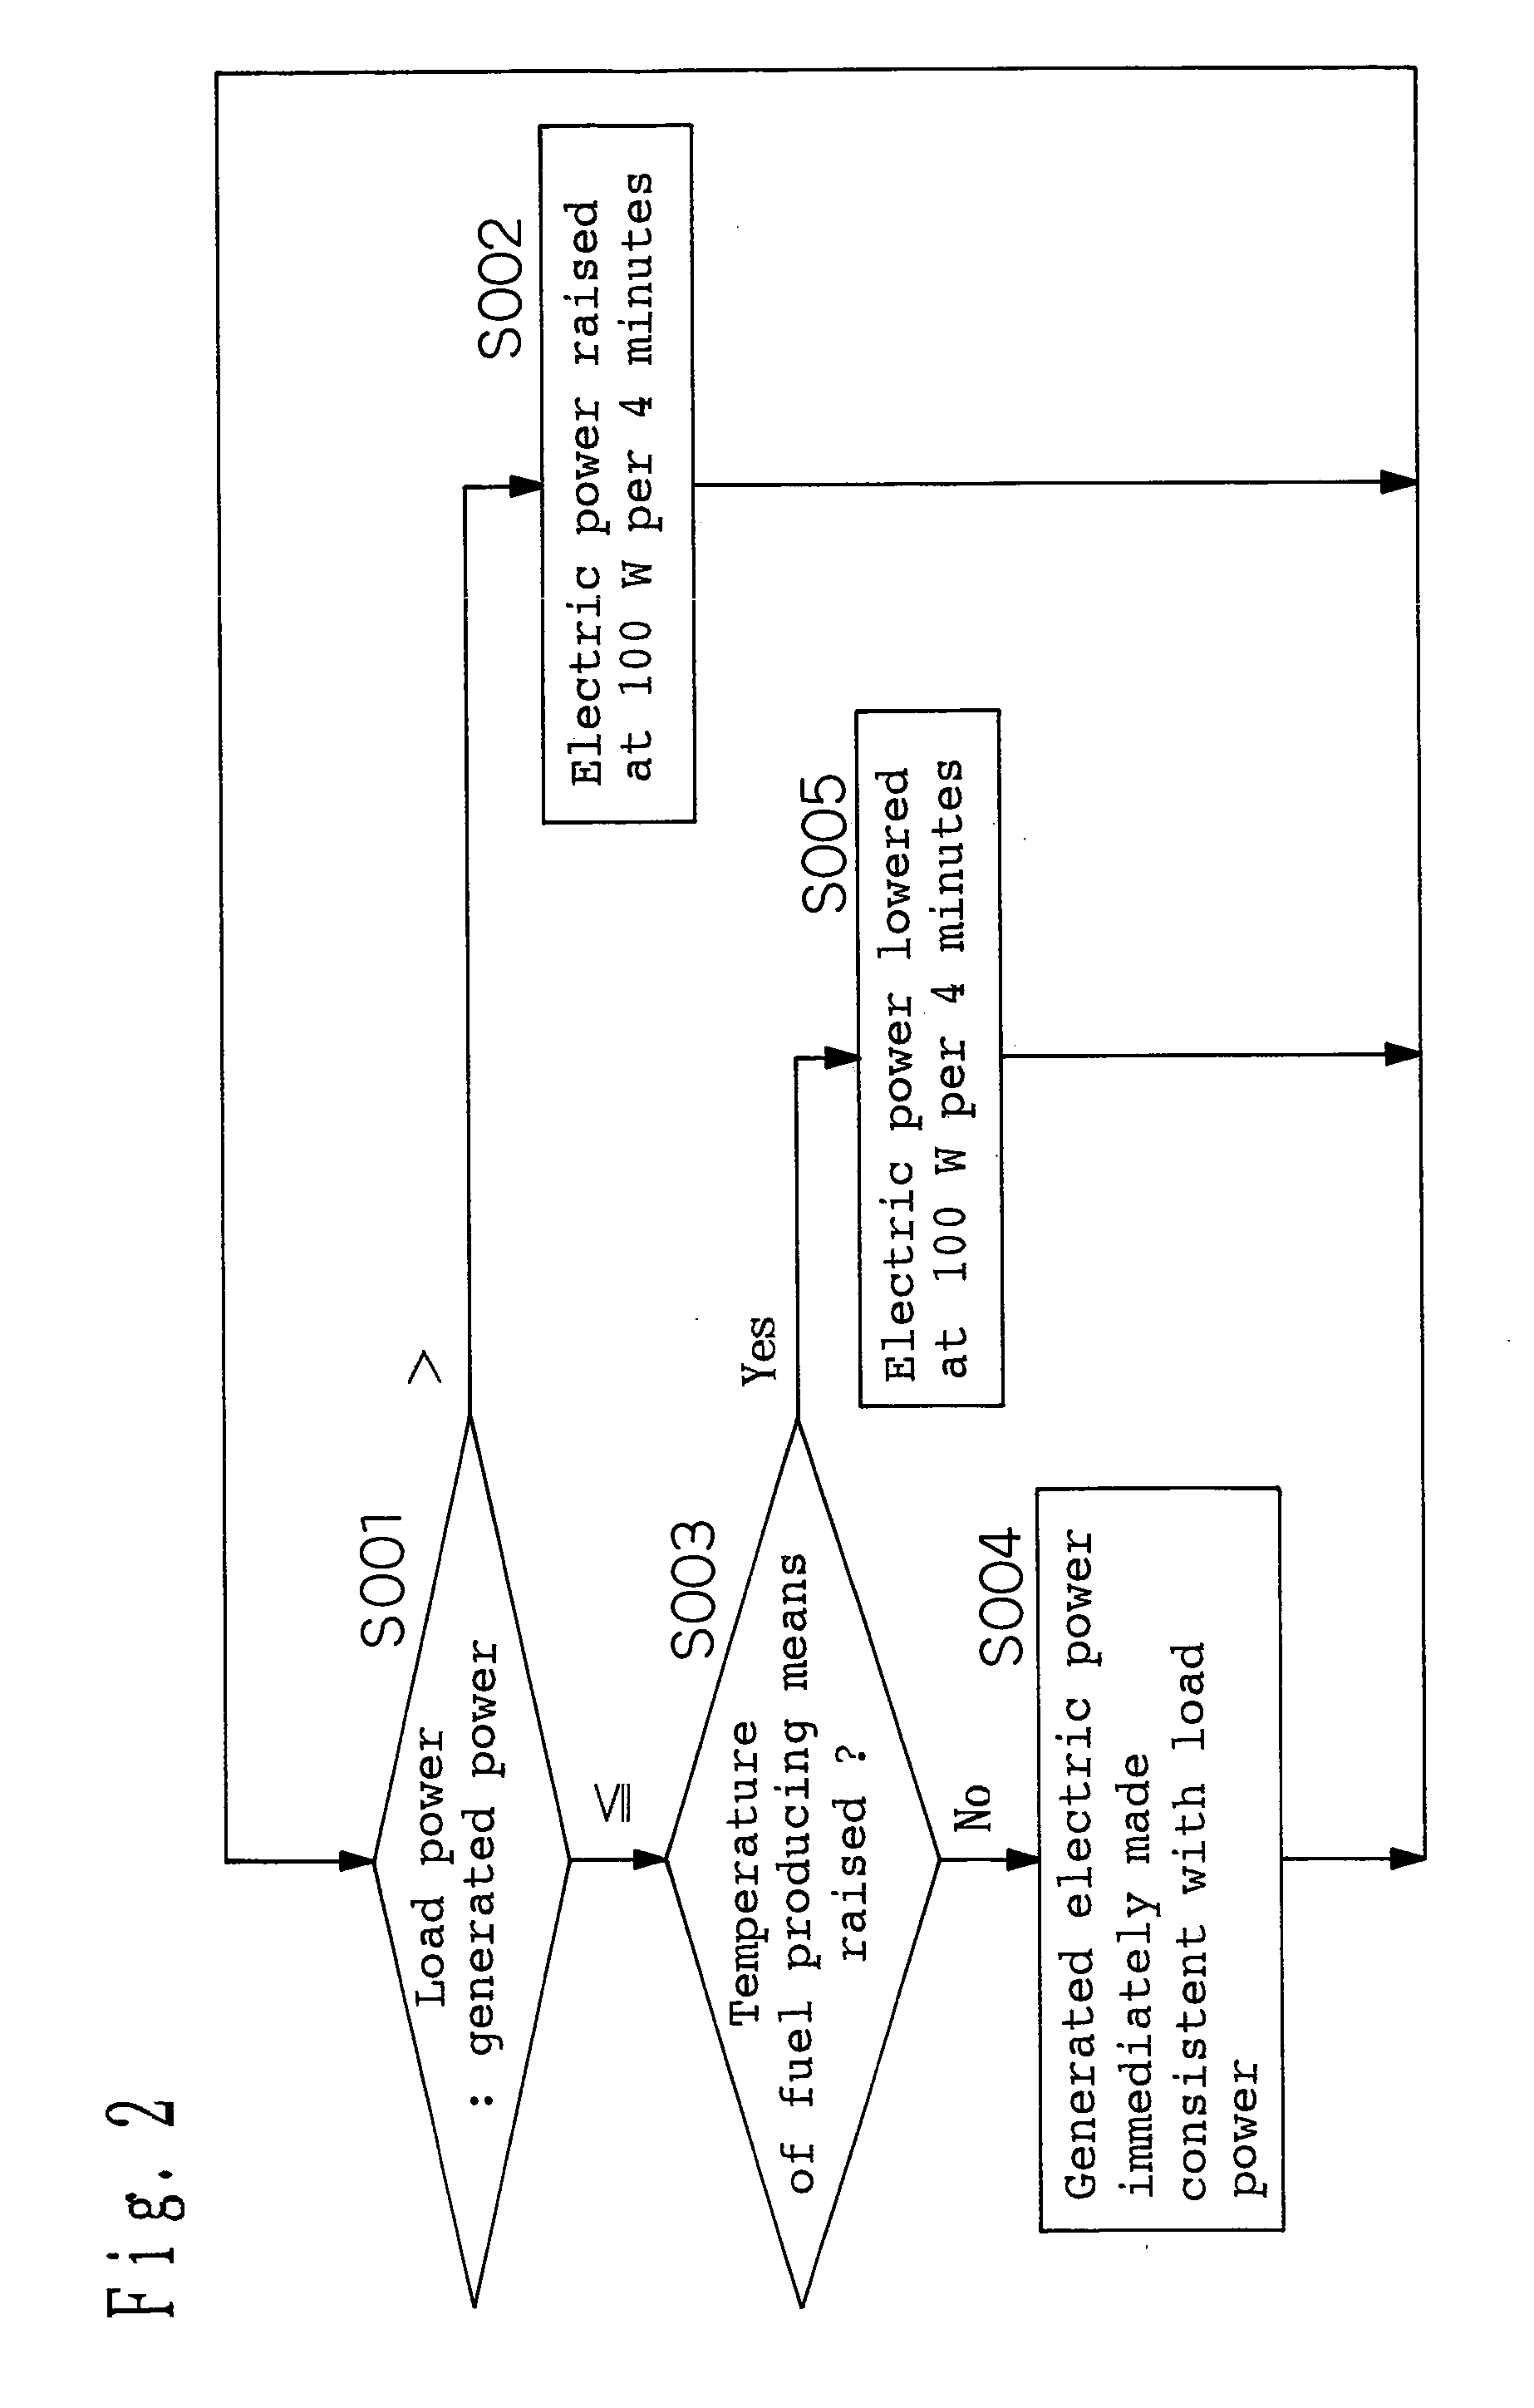 Fuel cell electricity-generating device